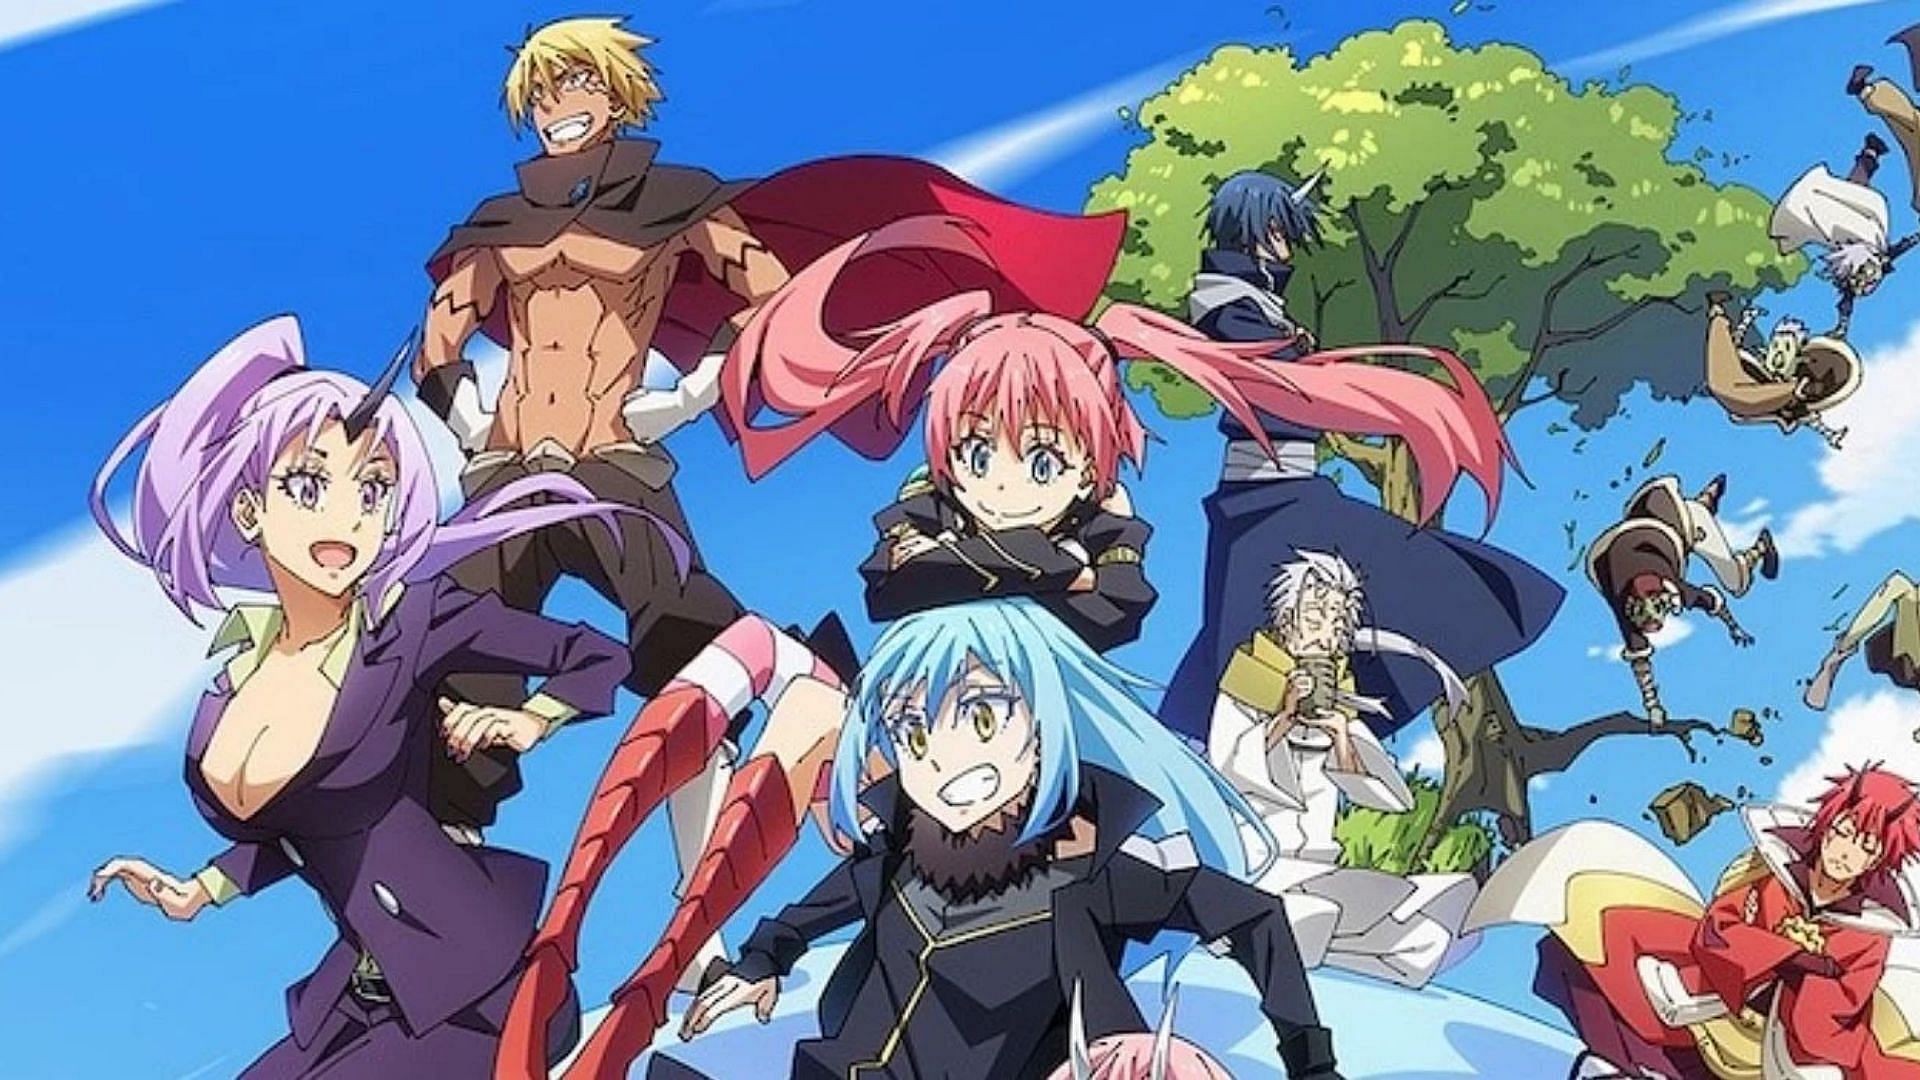 Main characters of That Time I Got Reincarnated As A Slime (Image via Fuse)